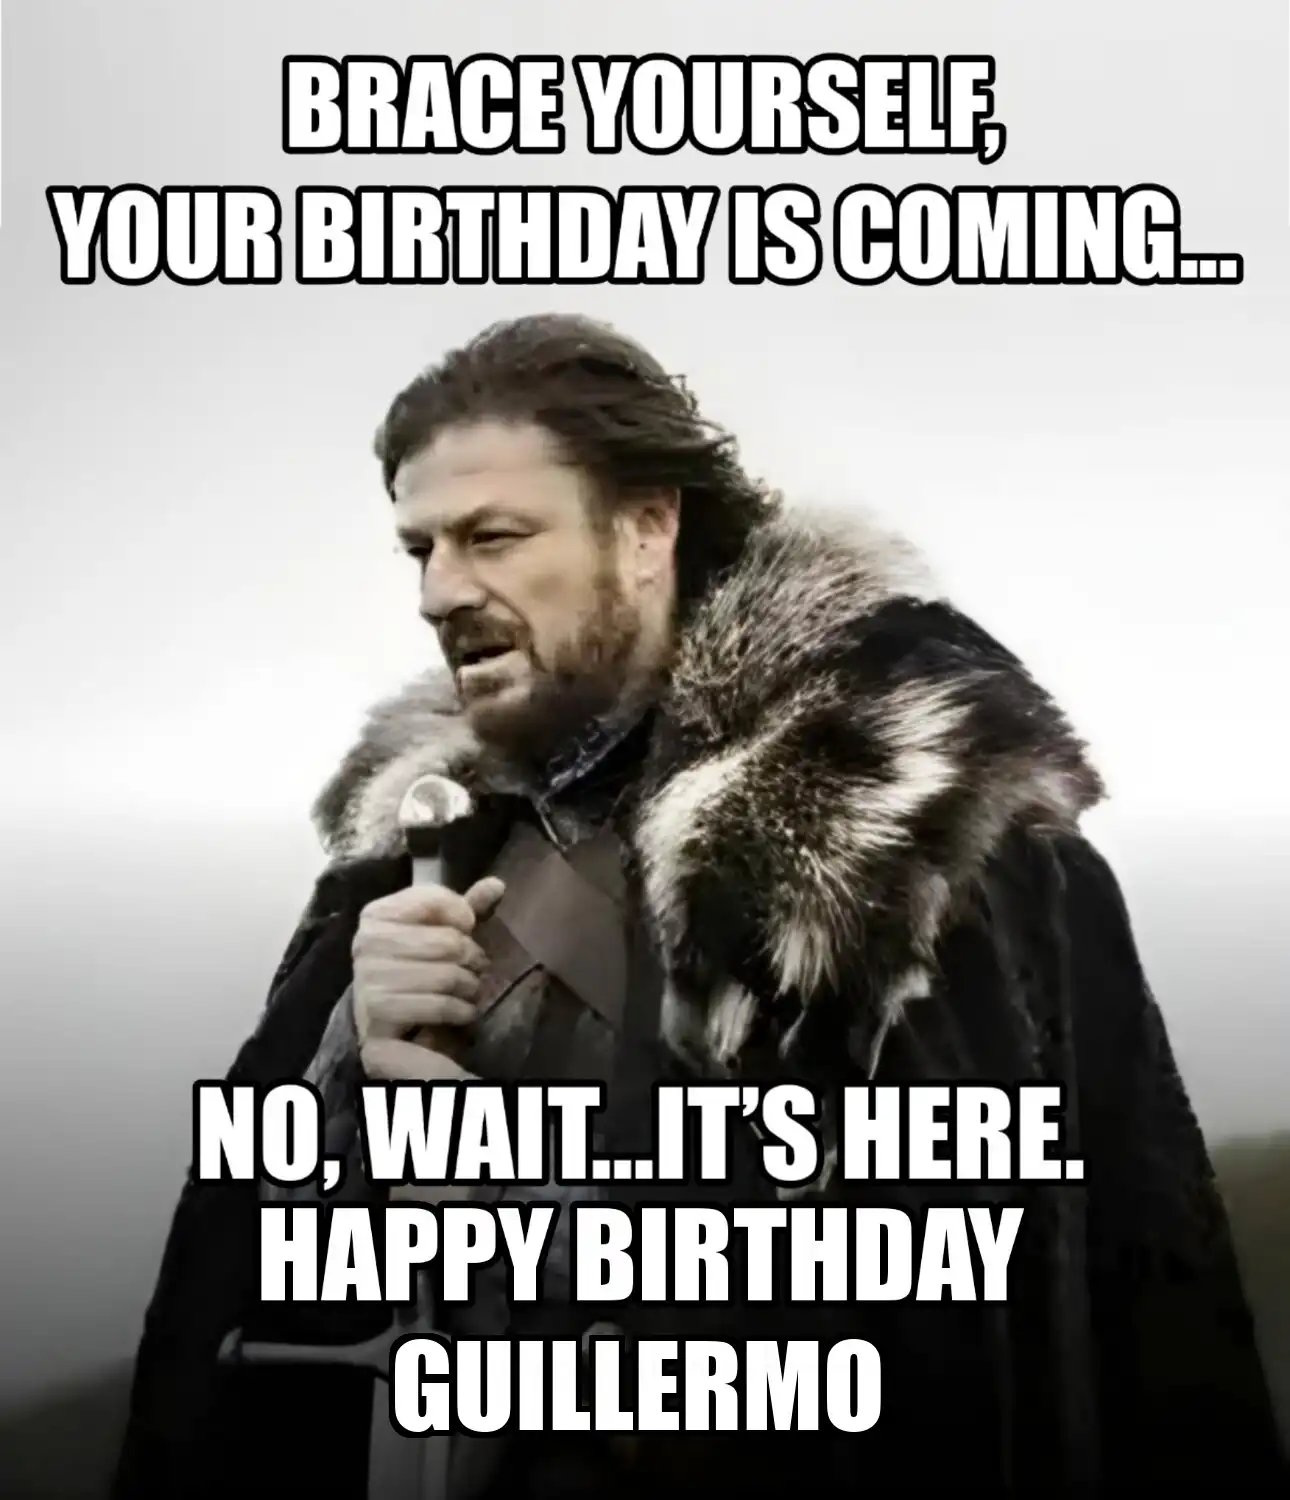 Happy Birthday Guillermo Brace Yourself Your Birthday Is Coming Meme